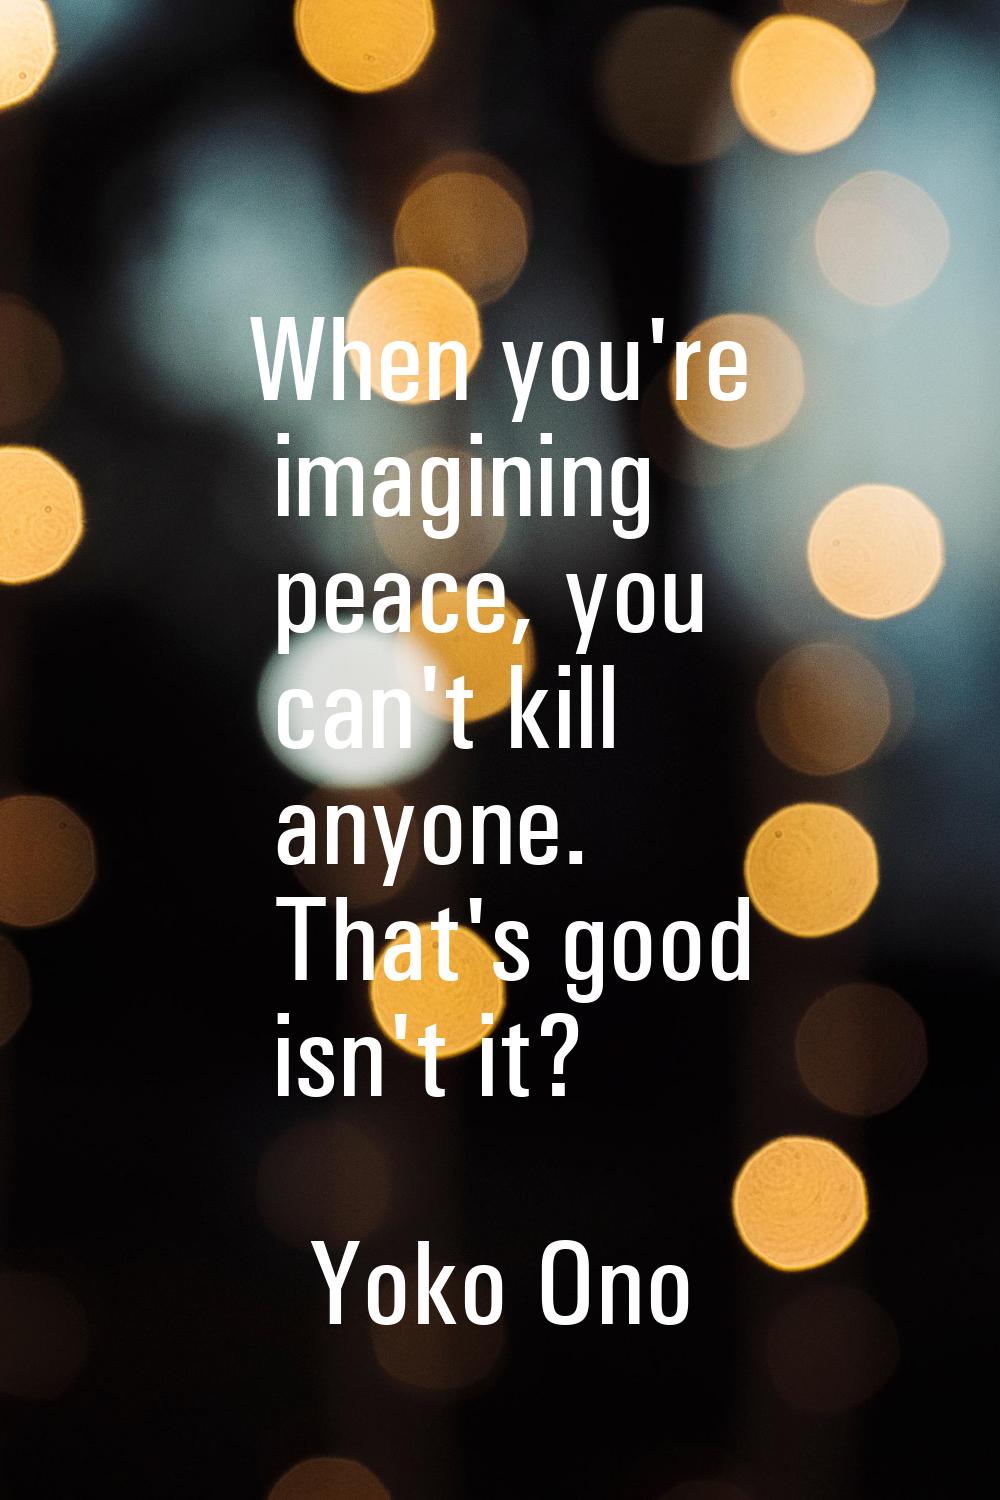 When you're imagining peace, you can't kill anyone. That's good isn't it?